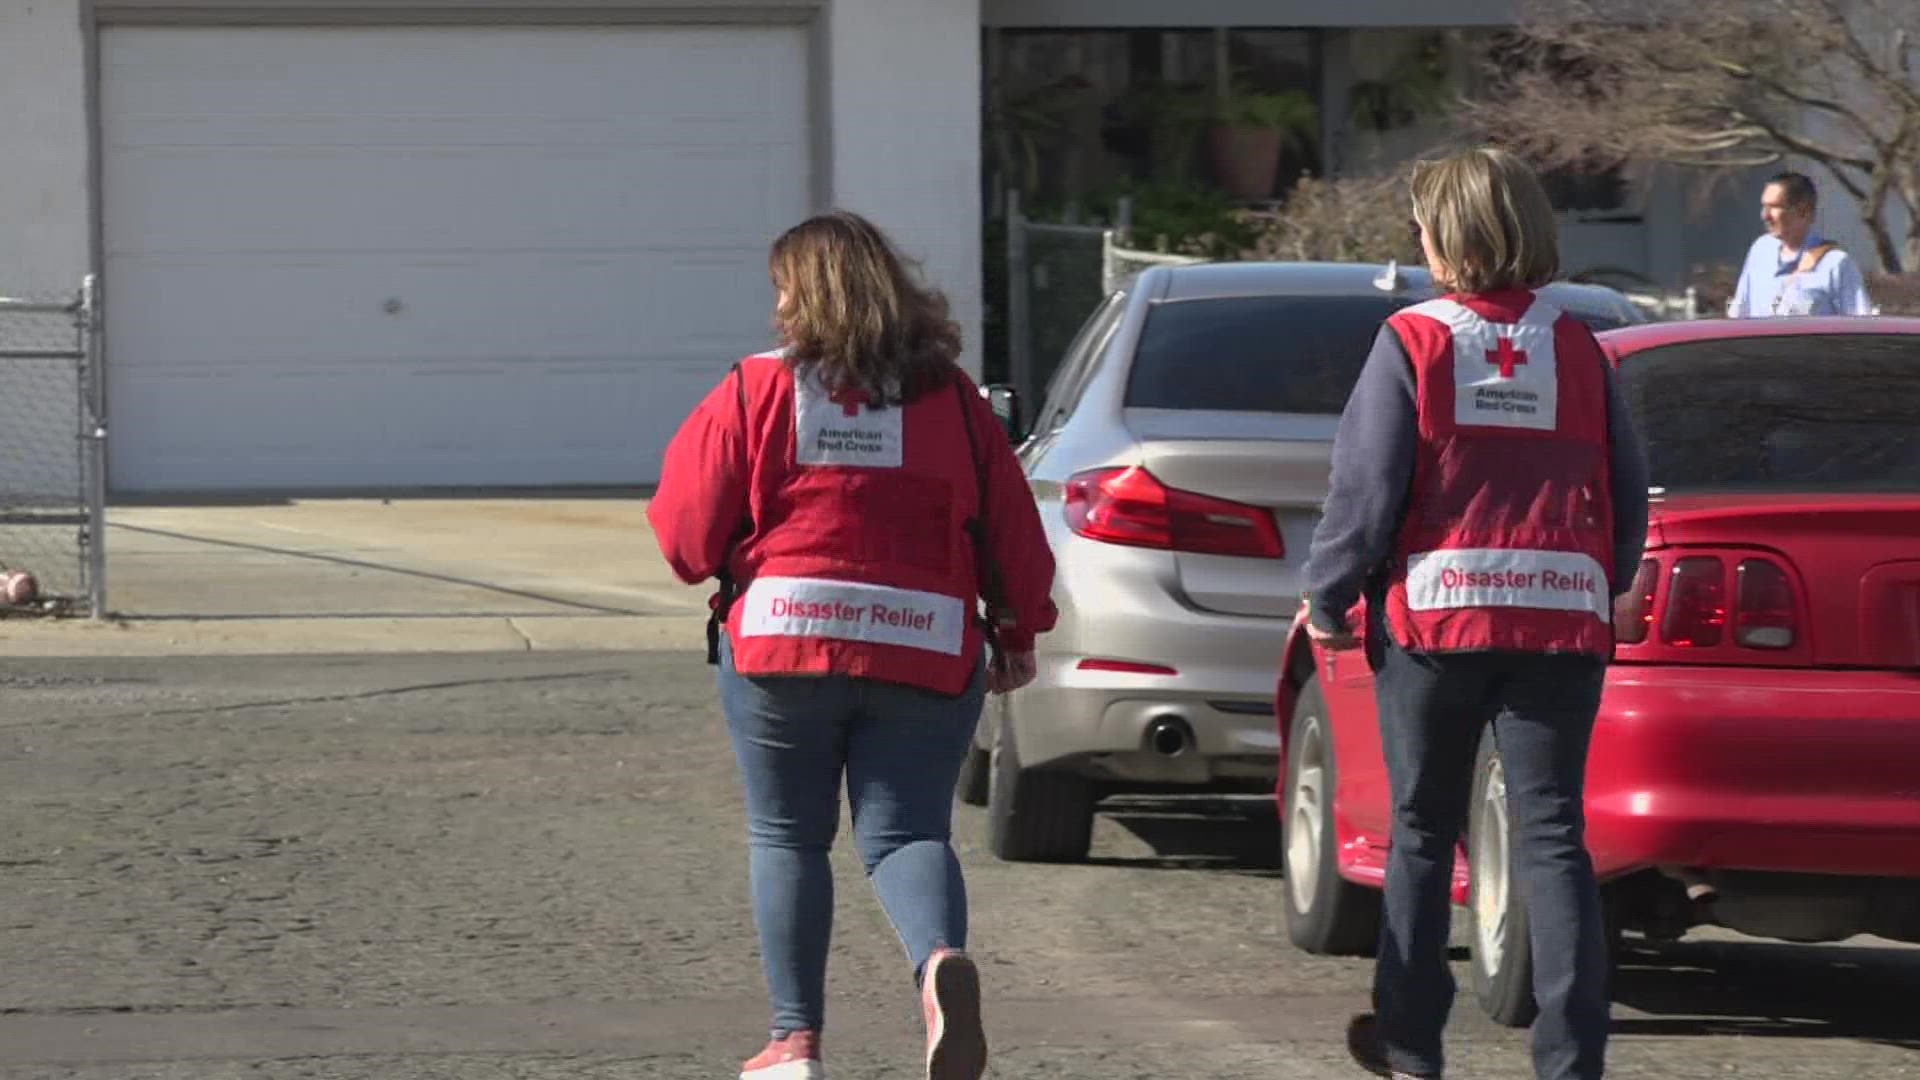 Sac Metro Fire partnered with the Red Cross to install smoke detectors and share fire safety tips in neighborhoods that have been impacted by recent deadly fires.